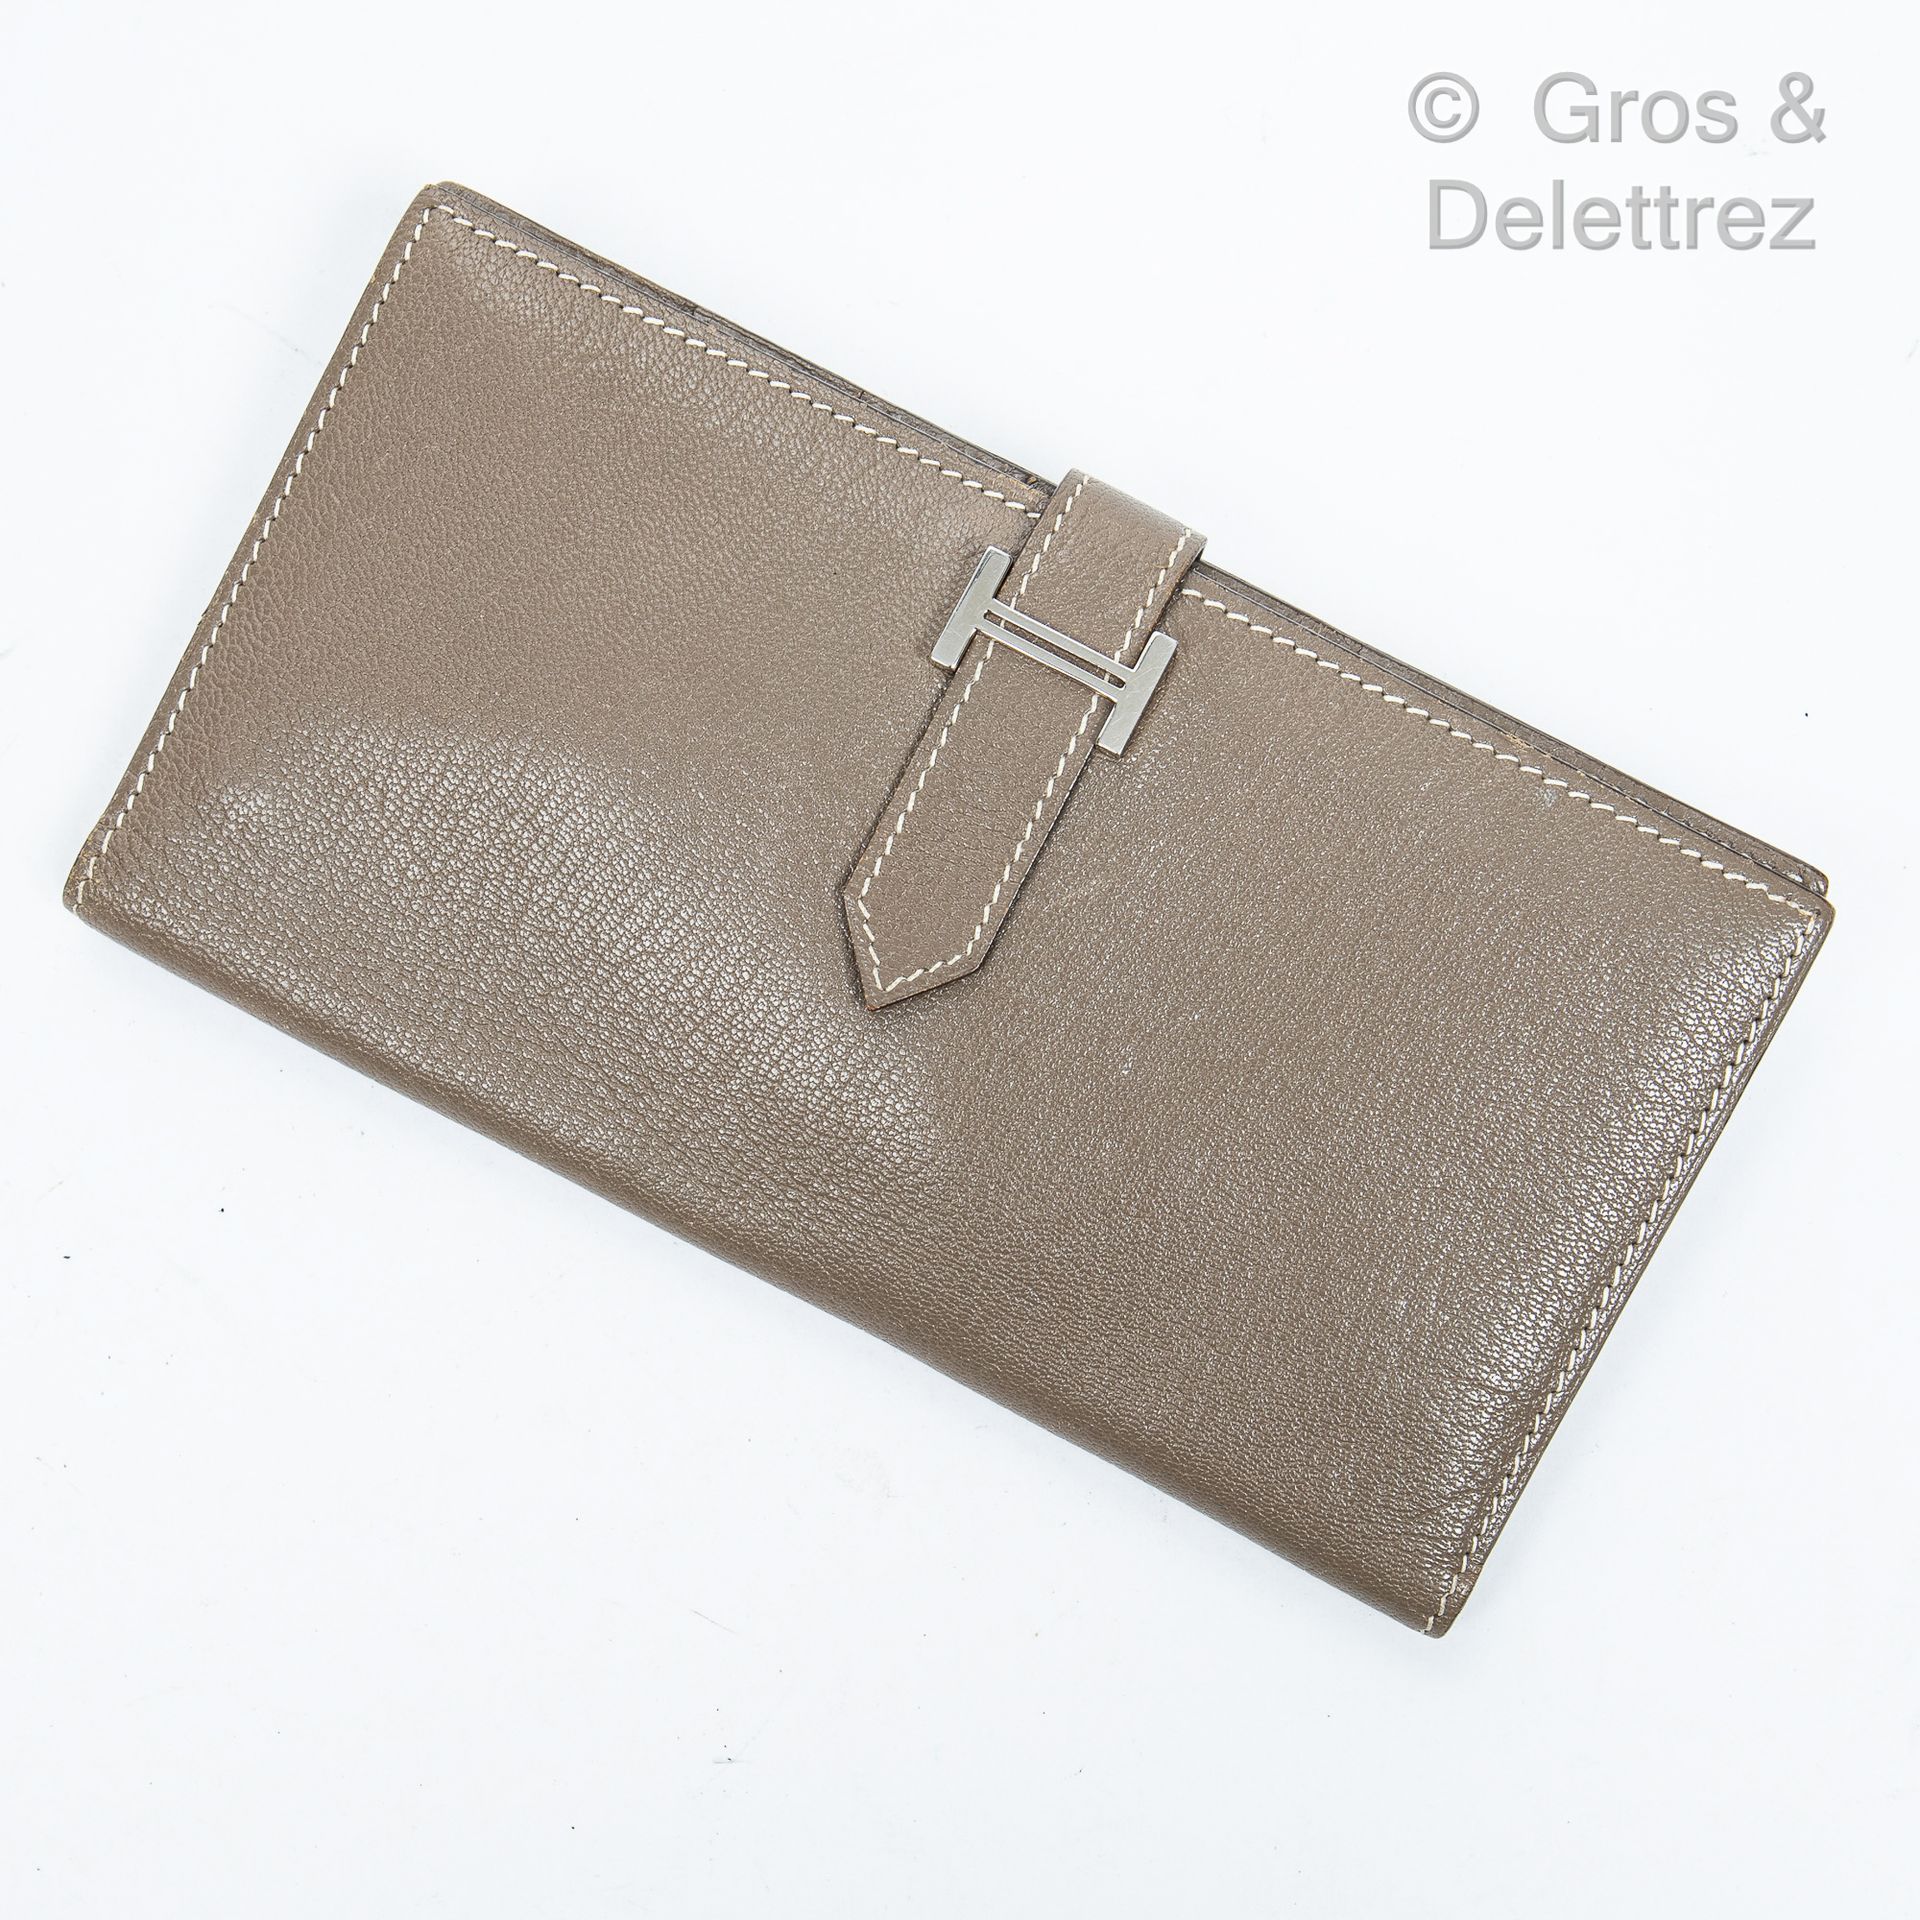 HERMÈS Paris made in France Year 2006

Wallet "Béarn" in taupe Epsom calfskin wi&hellip;